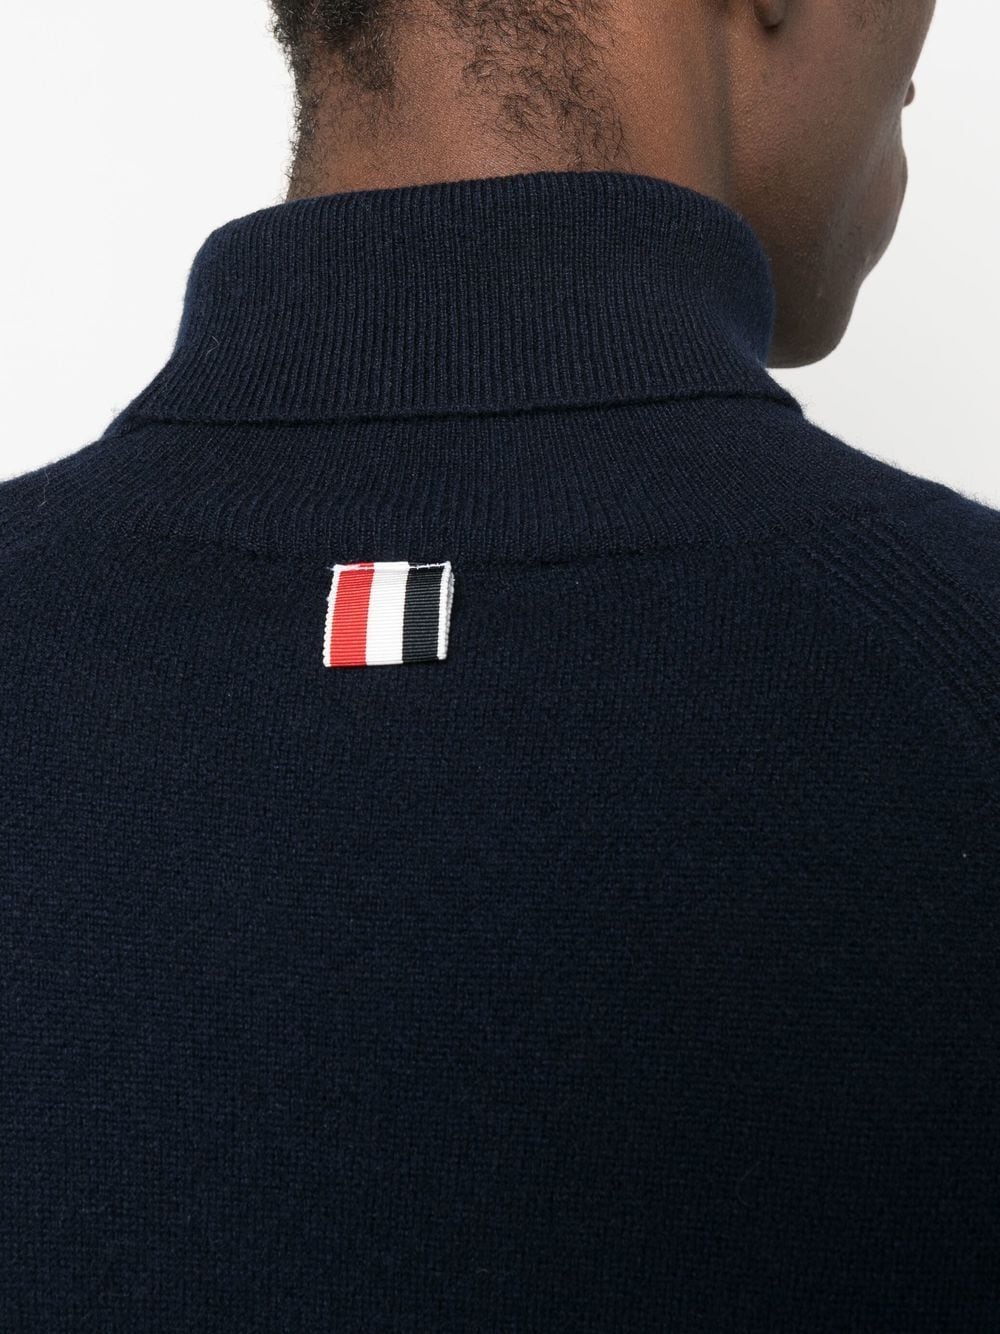 THOM BROWNE Men's Cashmere Turtleneck Sweater in Navy Blue for FW23